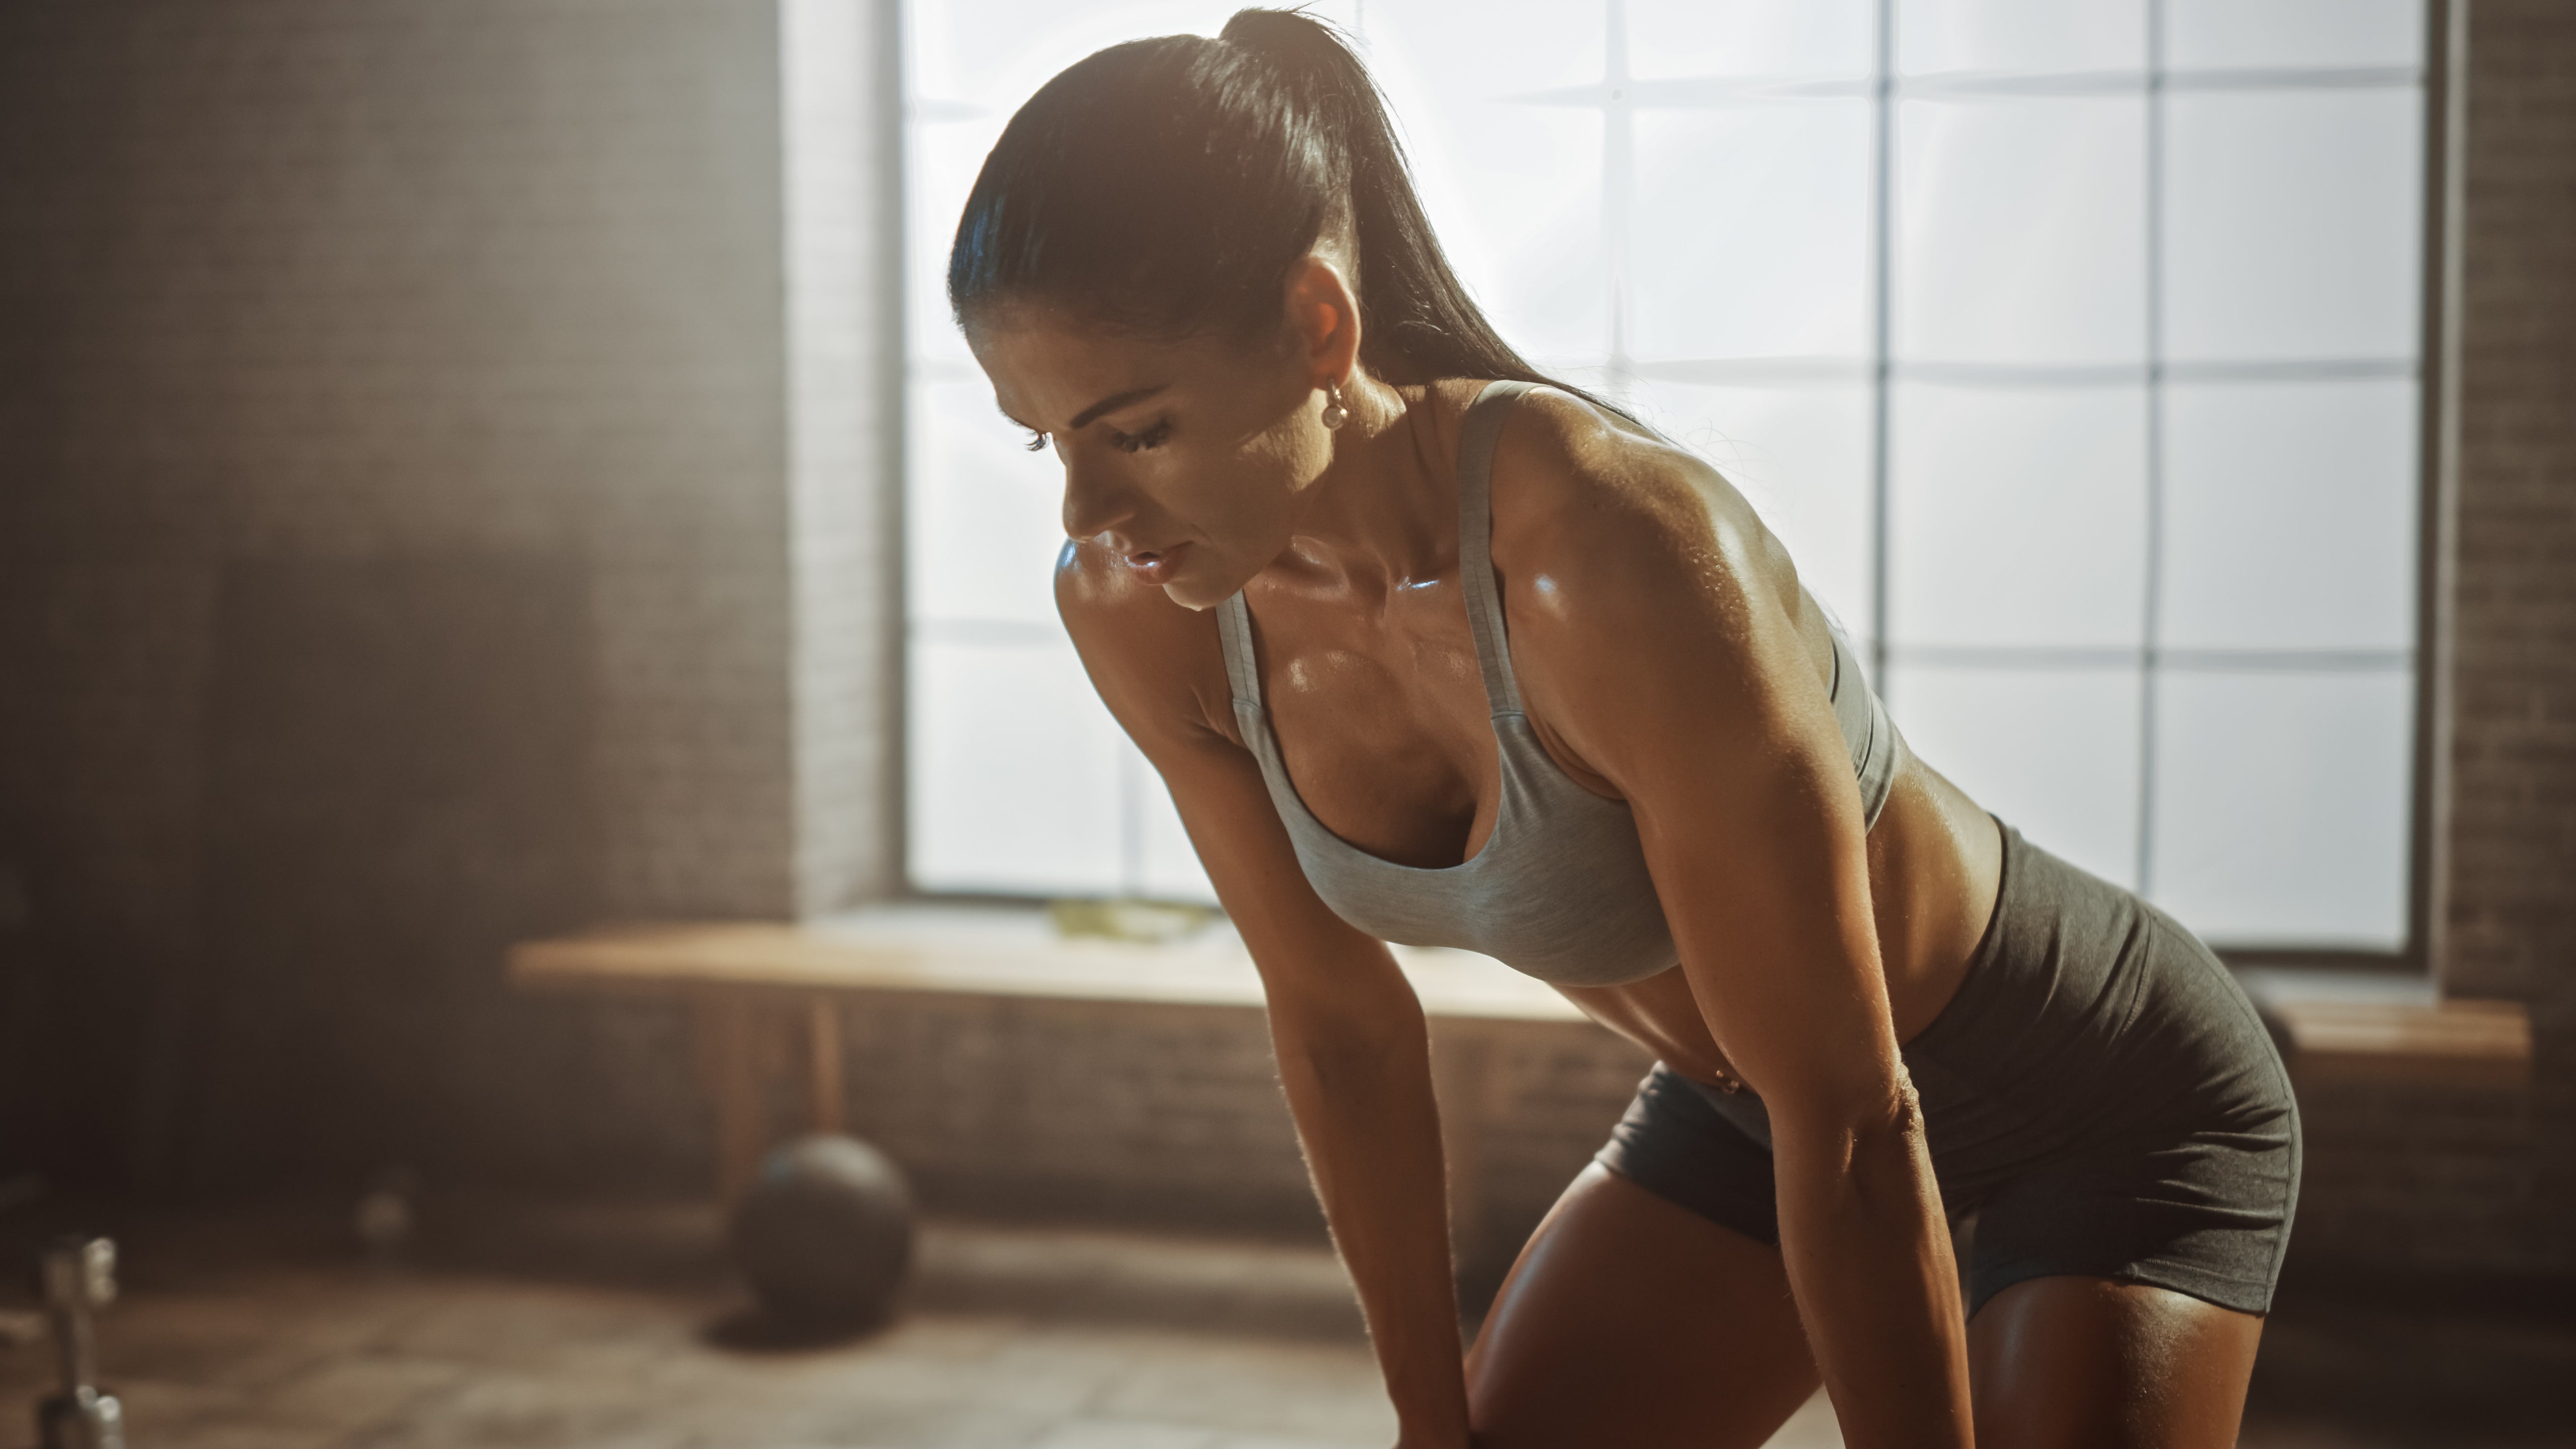 A very hot and sweaty woman in workout gear is bending over and resting during workouts. Sweating is normal and the Purra Antimicrobial Technology will protect your body from any odor or other unwanted issues.